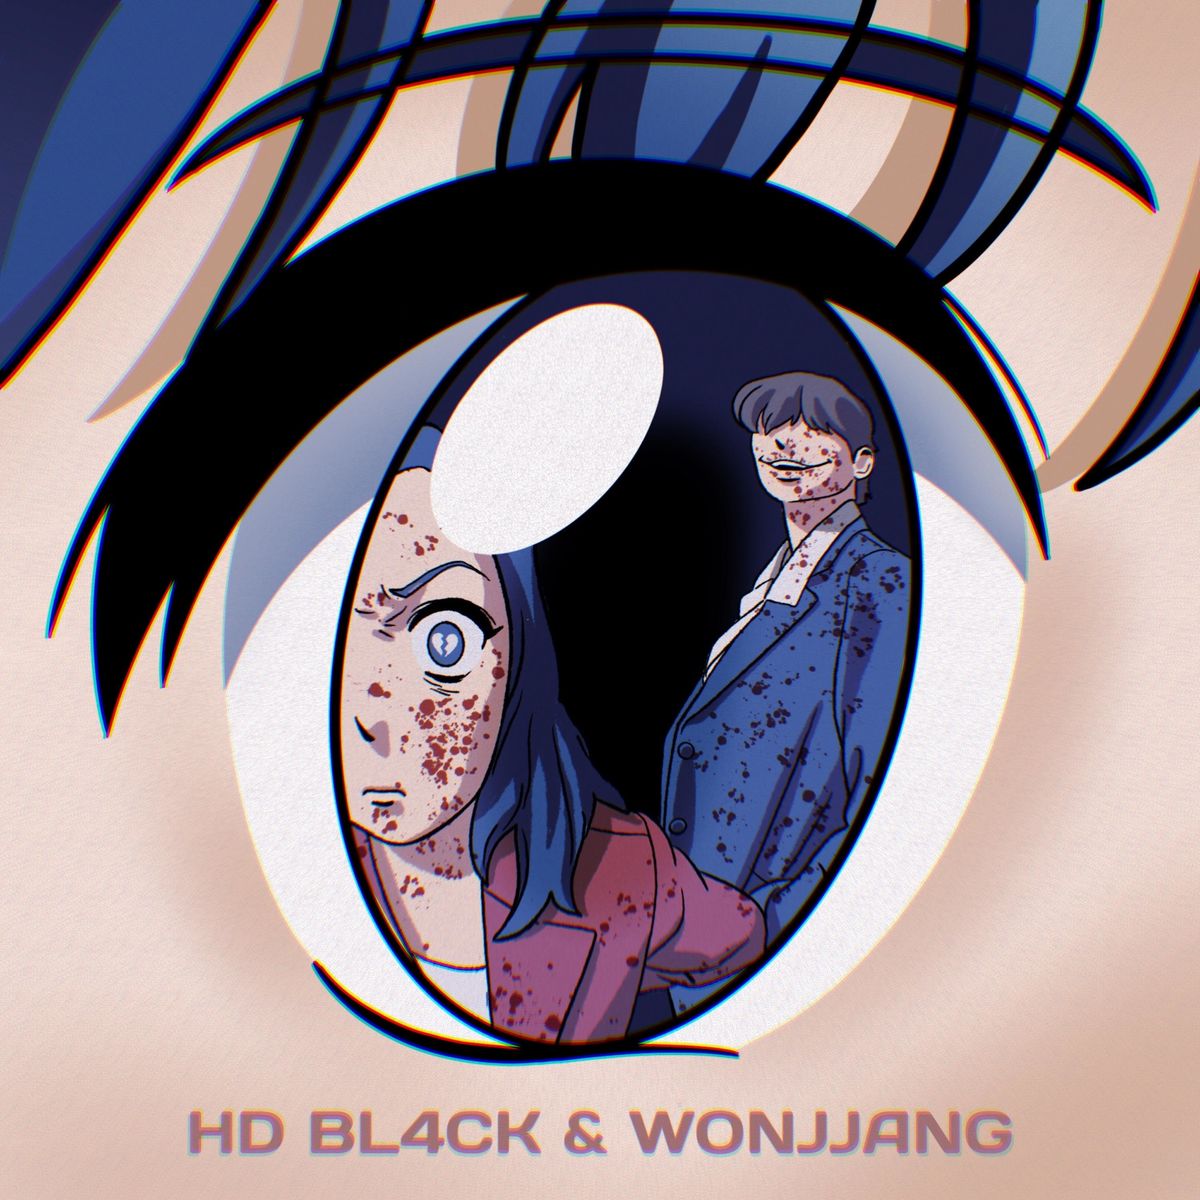 HD BL4CK & Wonjjang – My youth story is wrong as I expected. – EP